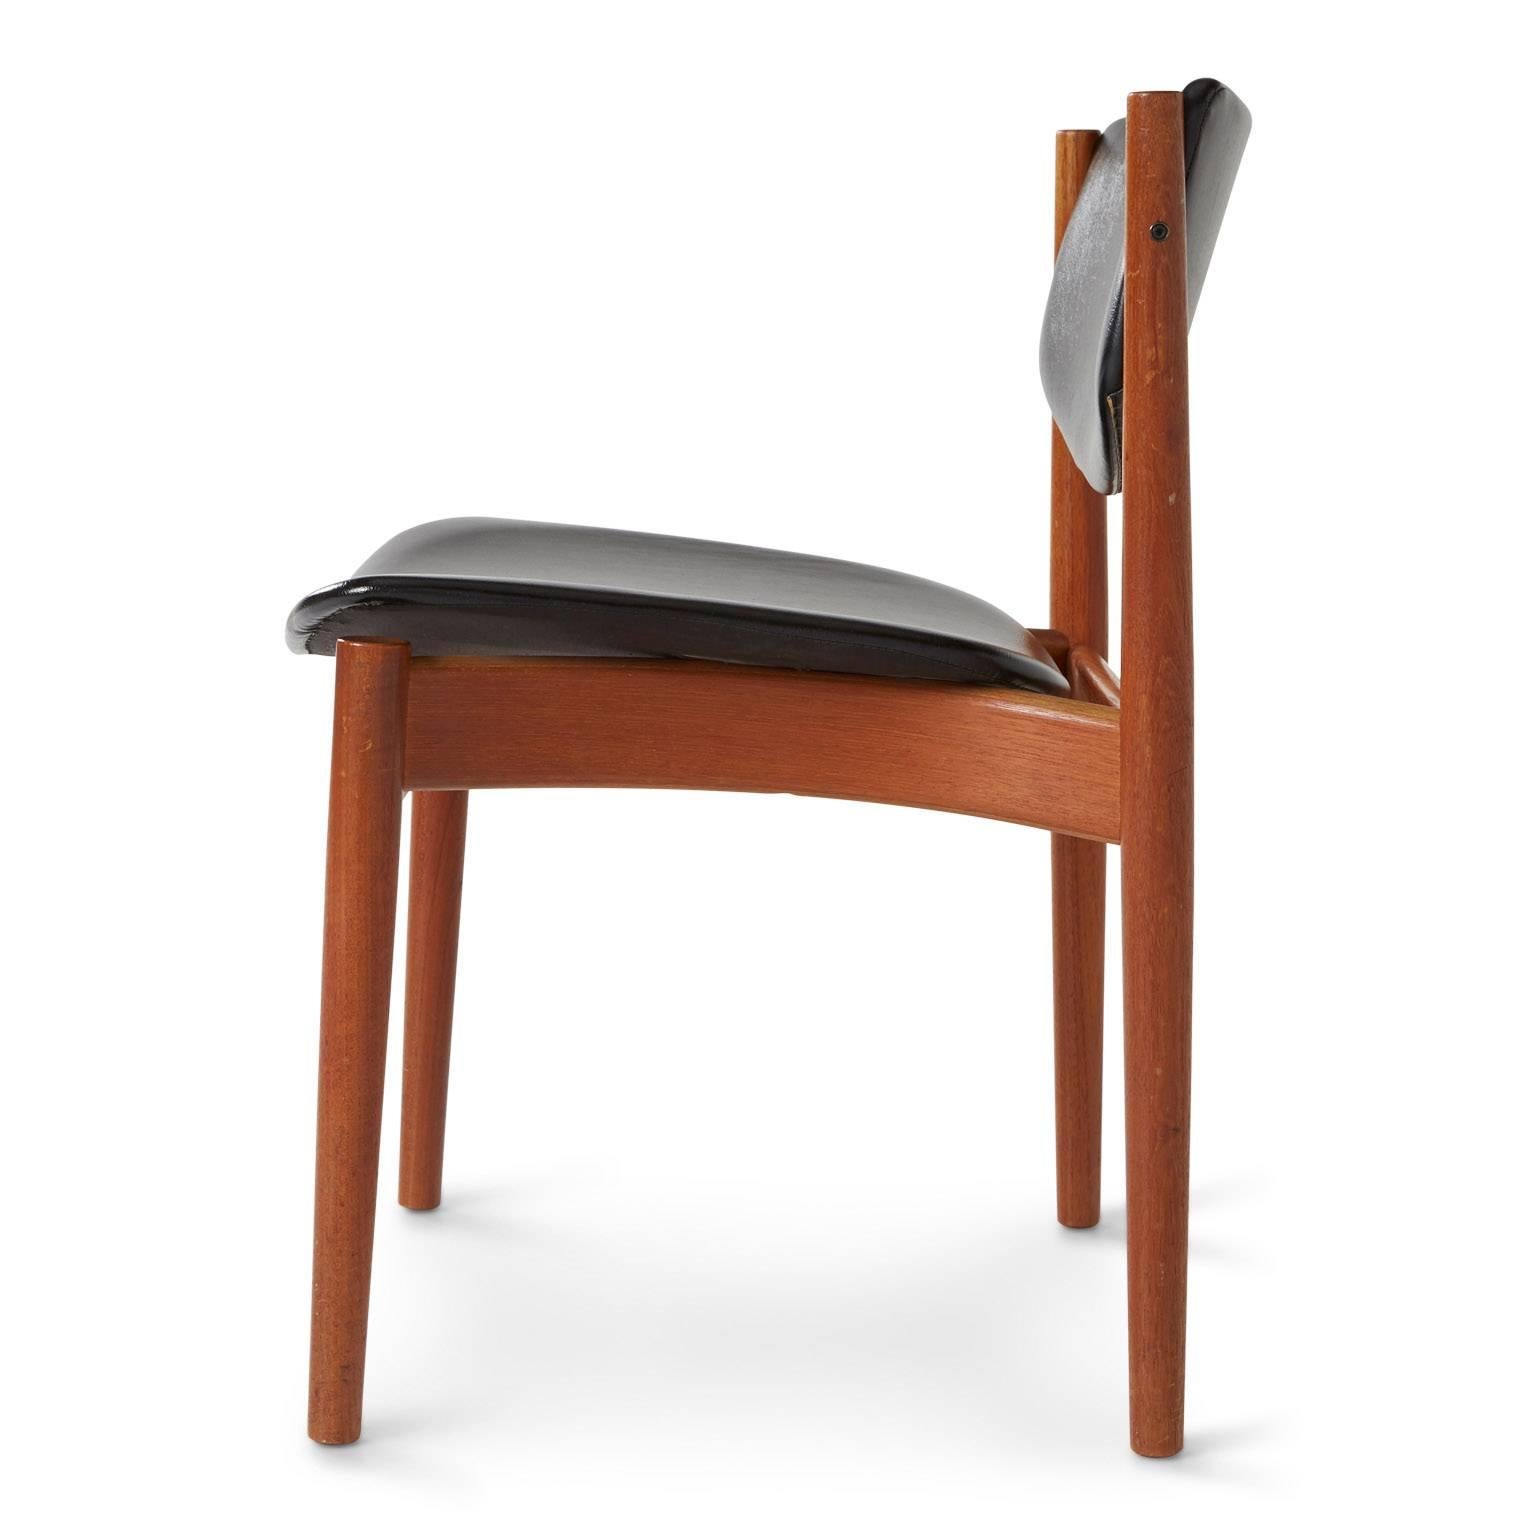 Designed by Finn Juhl for France & Son and imported by John Stuart, a New York designer showroom, this elegant chair was made in Denmark and bares the manufacture stamp of origin underneath. It maintains original black vinyl upholstery that is